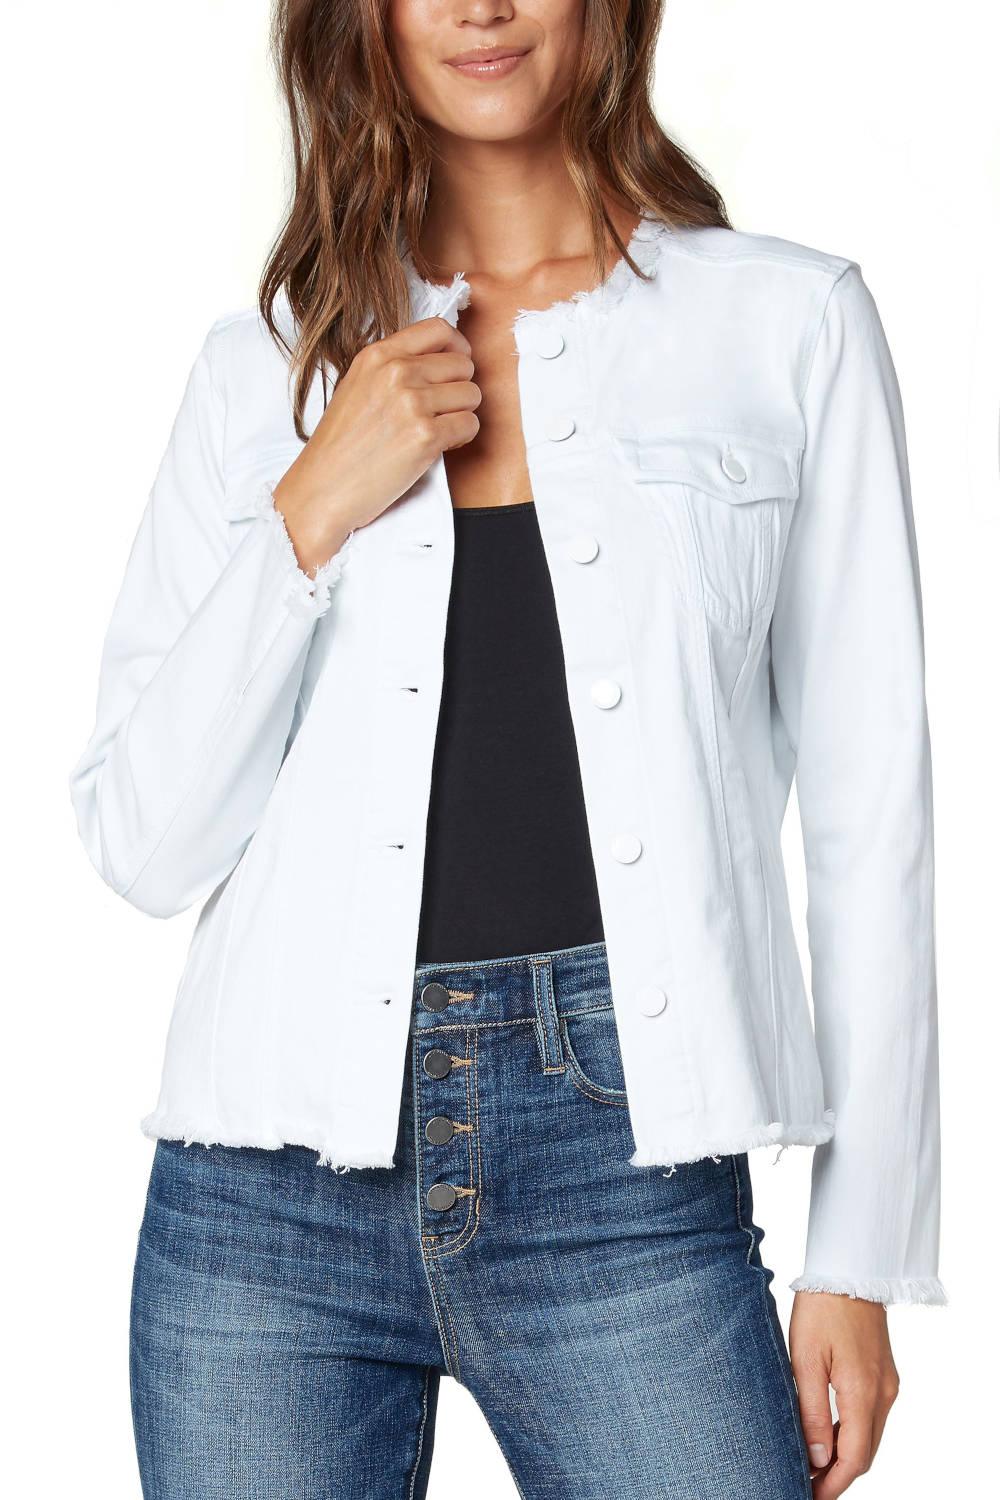 Liverpool White Classic Jean Jacket With Fray Hem - Strawberry Moon Boutique